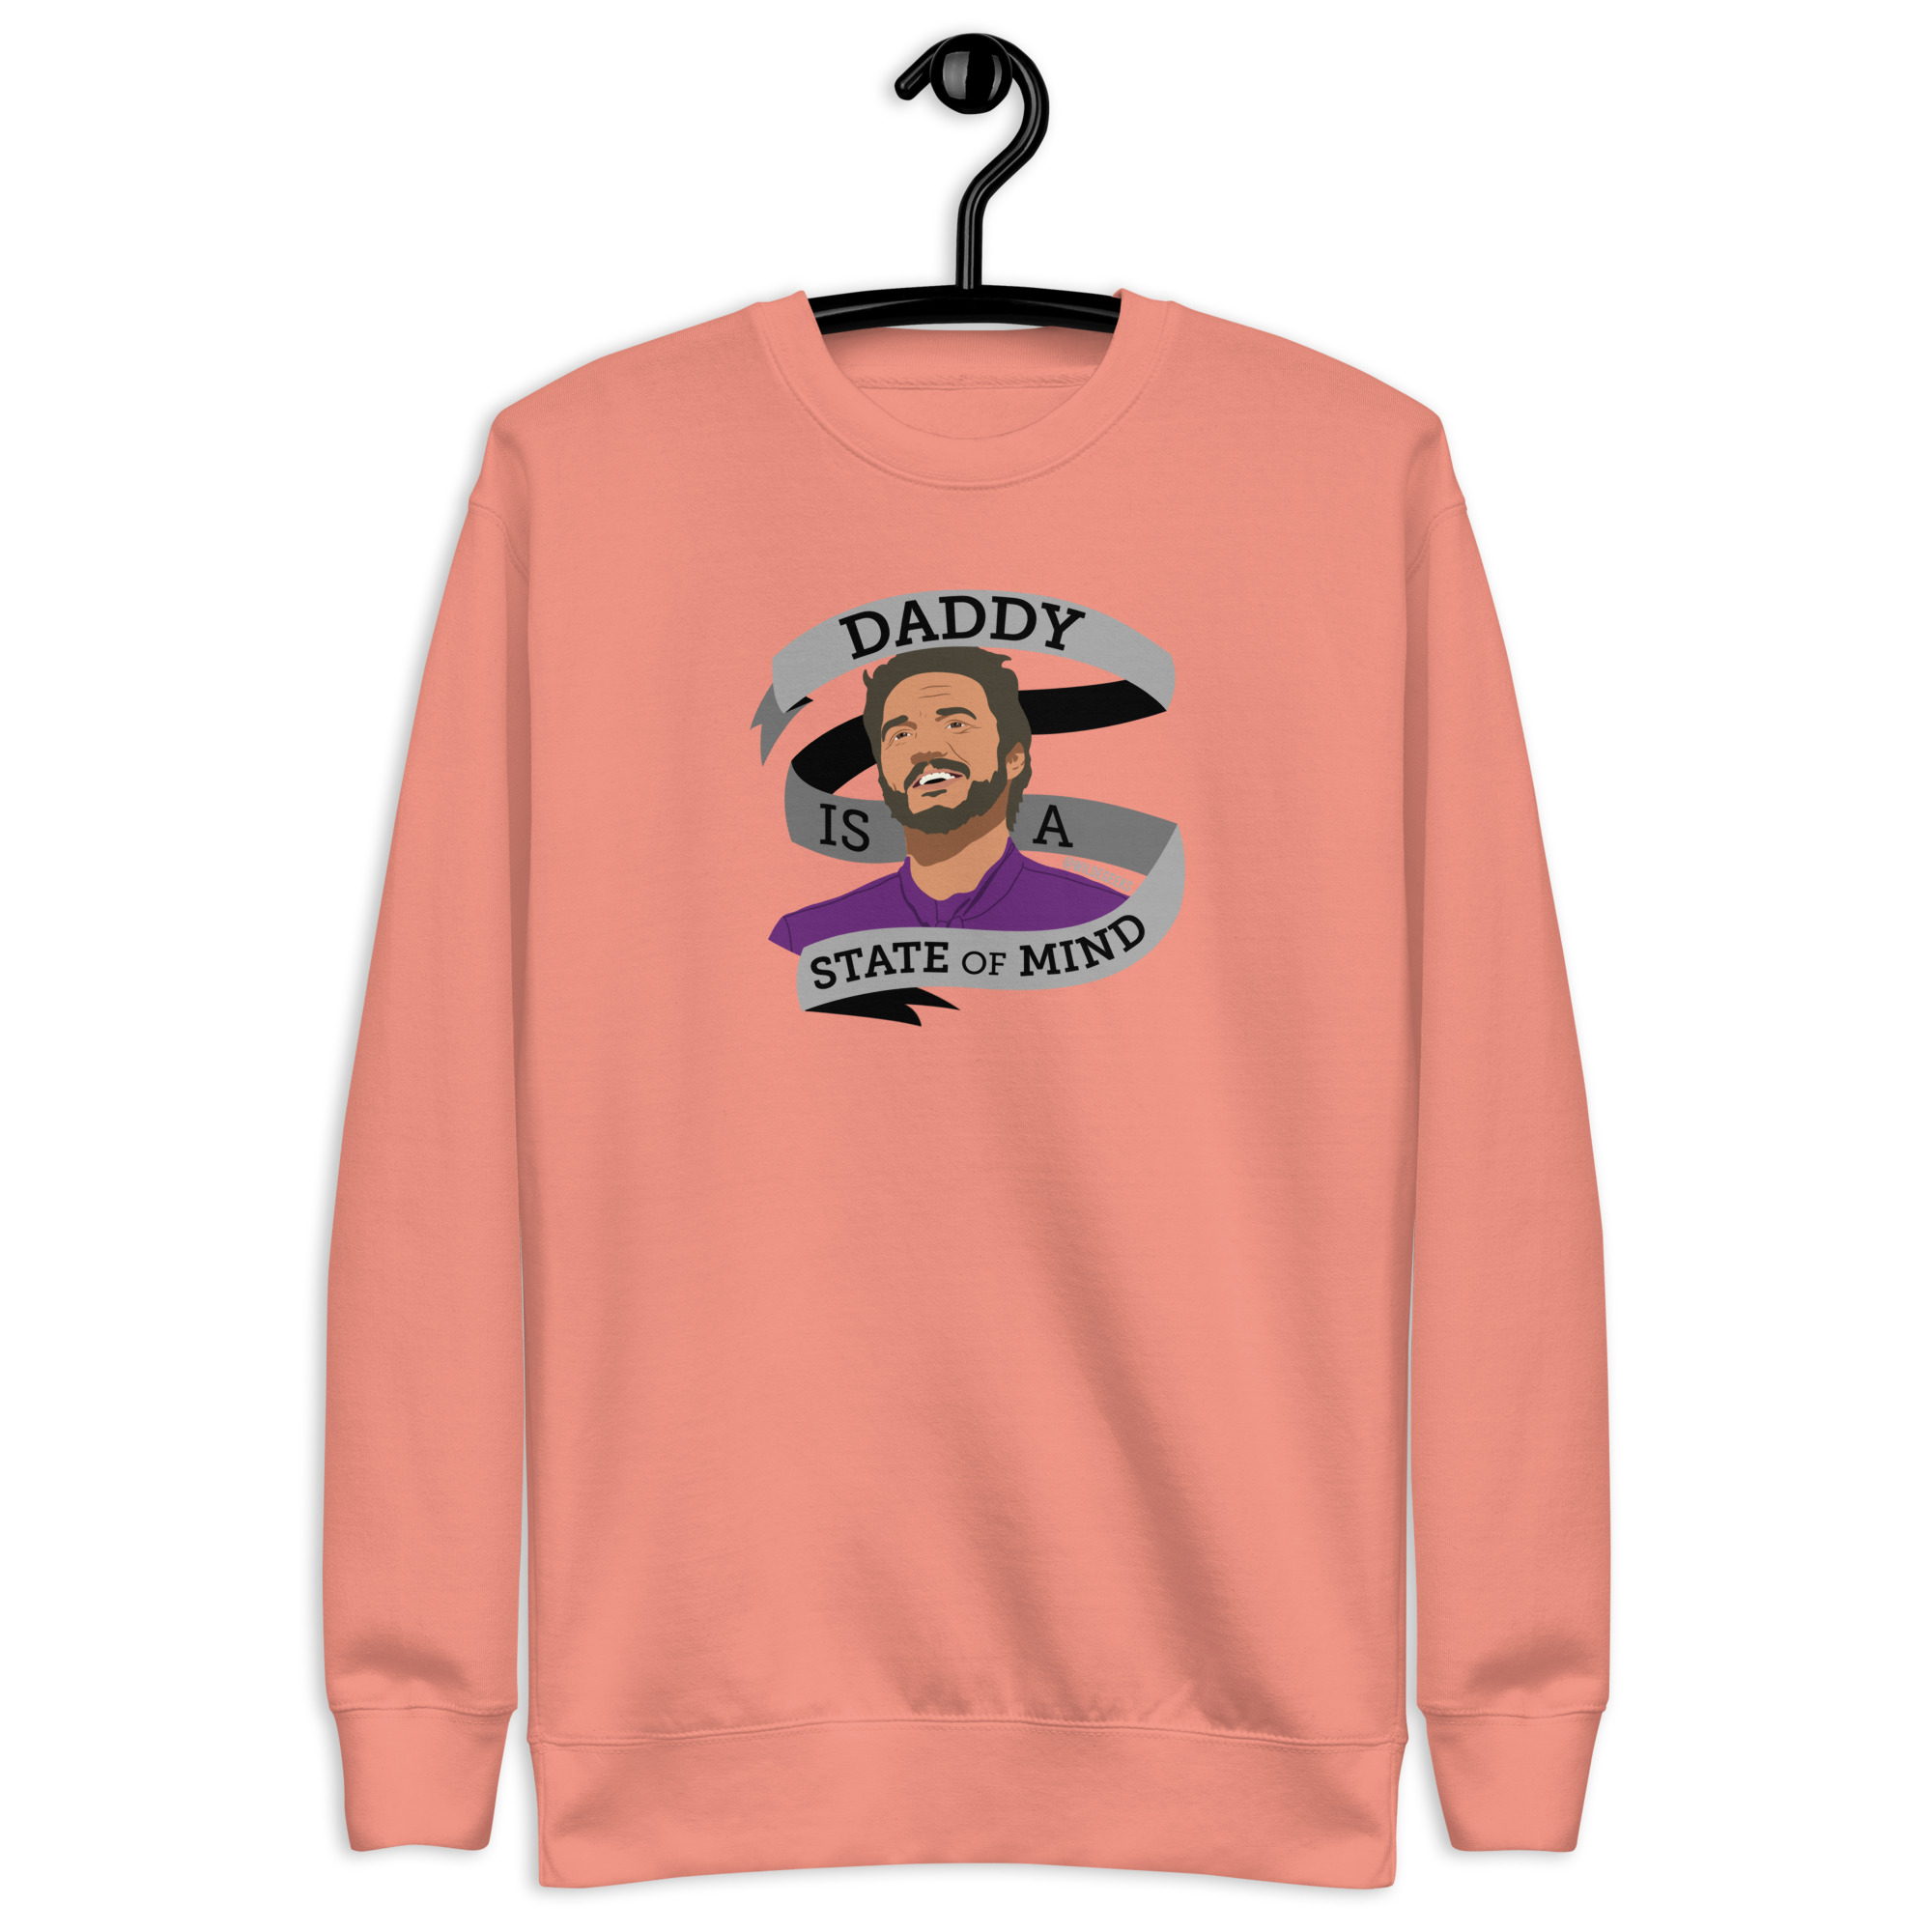 Daddy is a State of Mind Sweatshirt by Wilde Designs